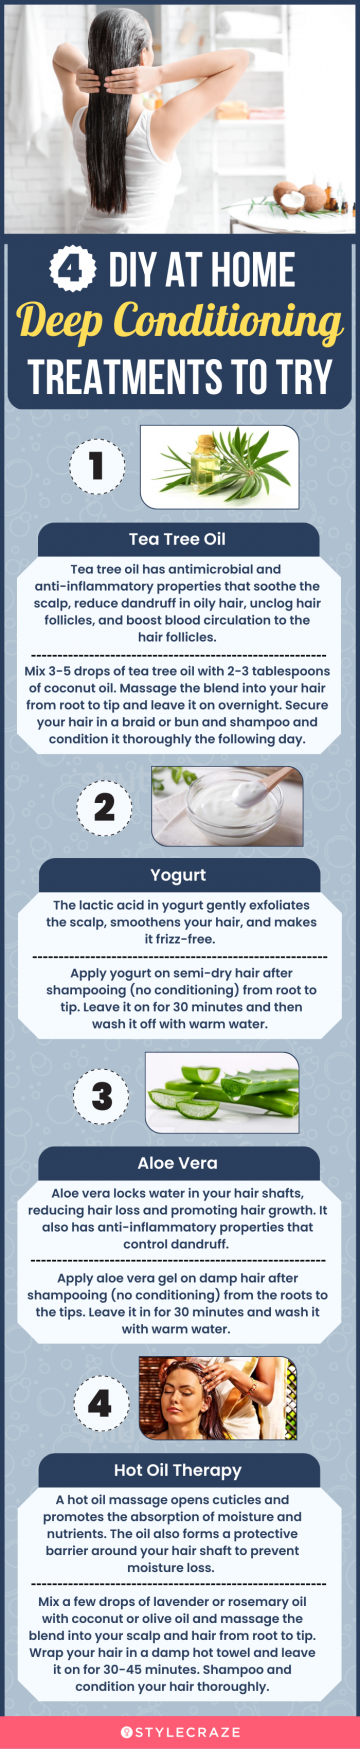 4 diy at home deep conditioning treatments to try (infographic)